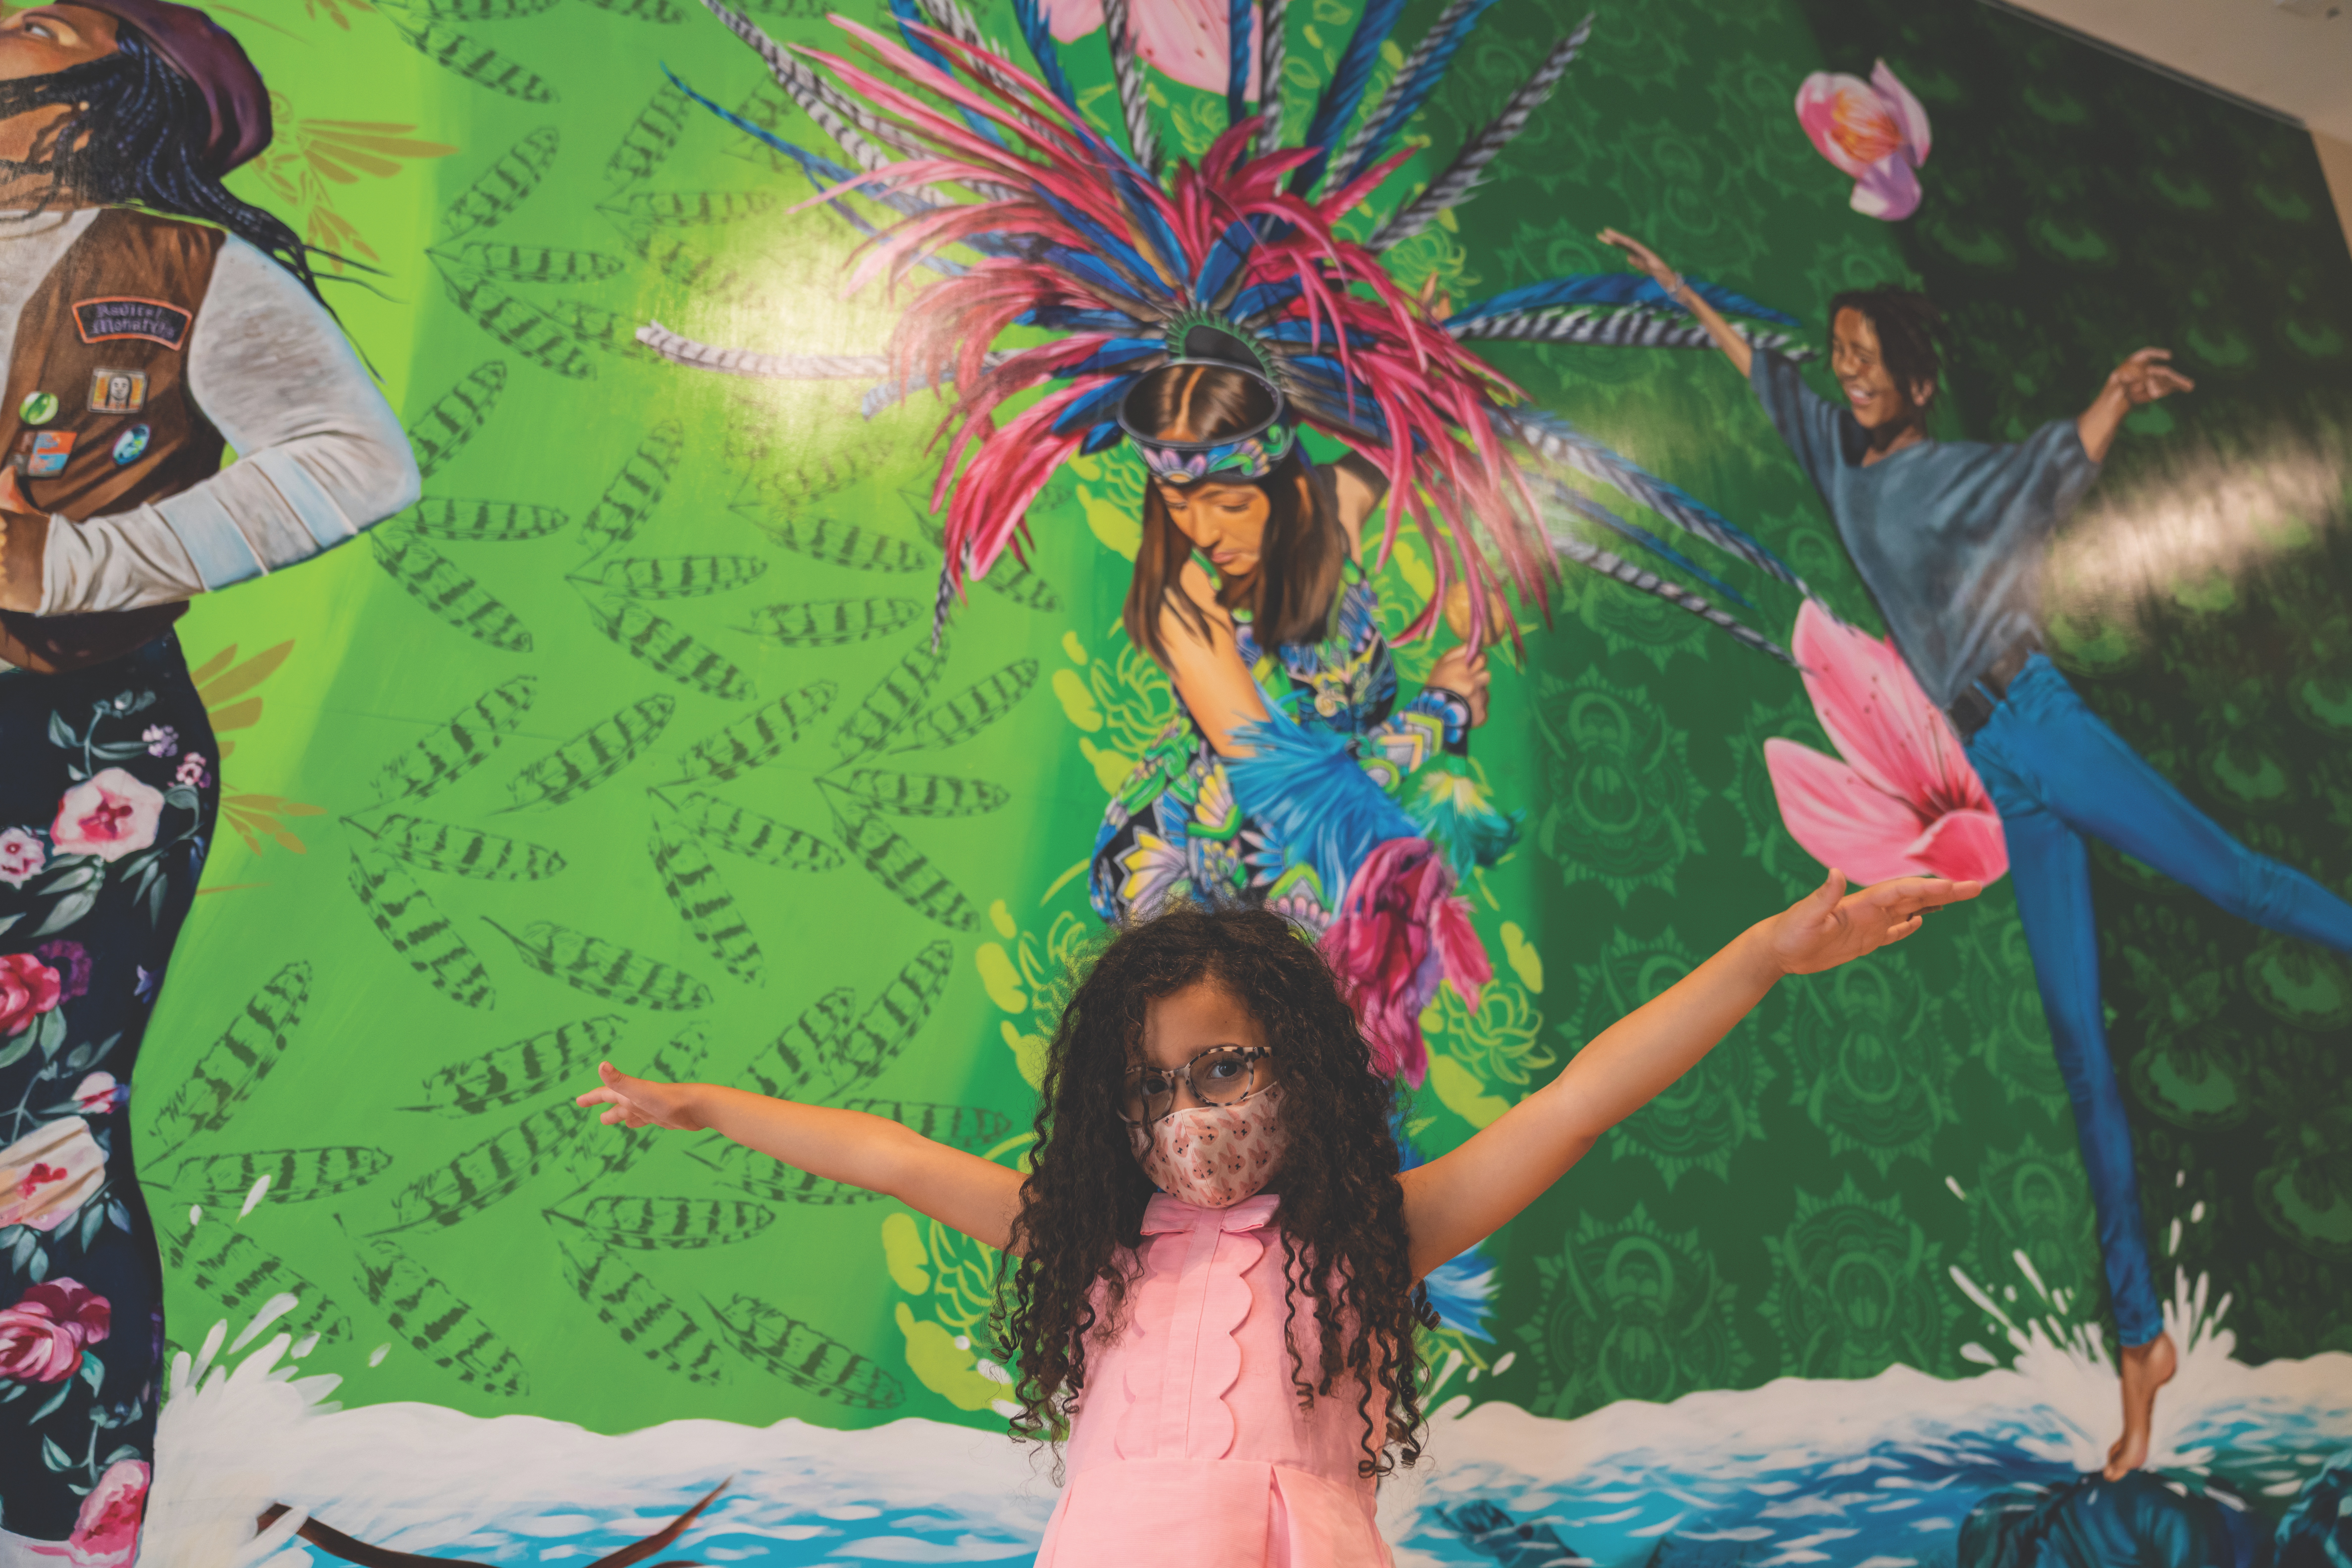 A young girl poses with her arms in the air in front of Twin Walls Mural Company's mural "Our Ancestors Wildest Dreams" depicting various women and girls dancing.